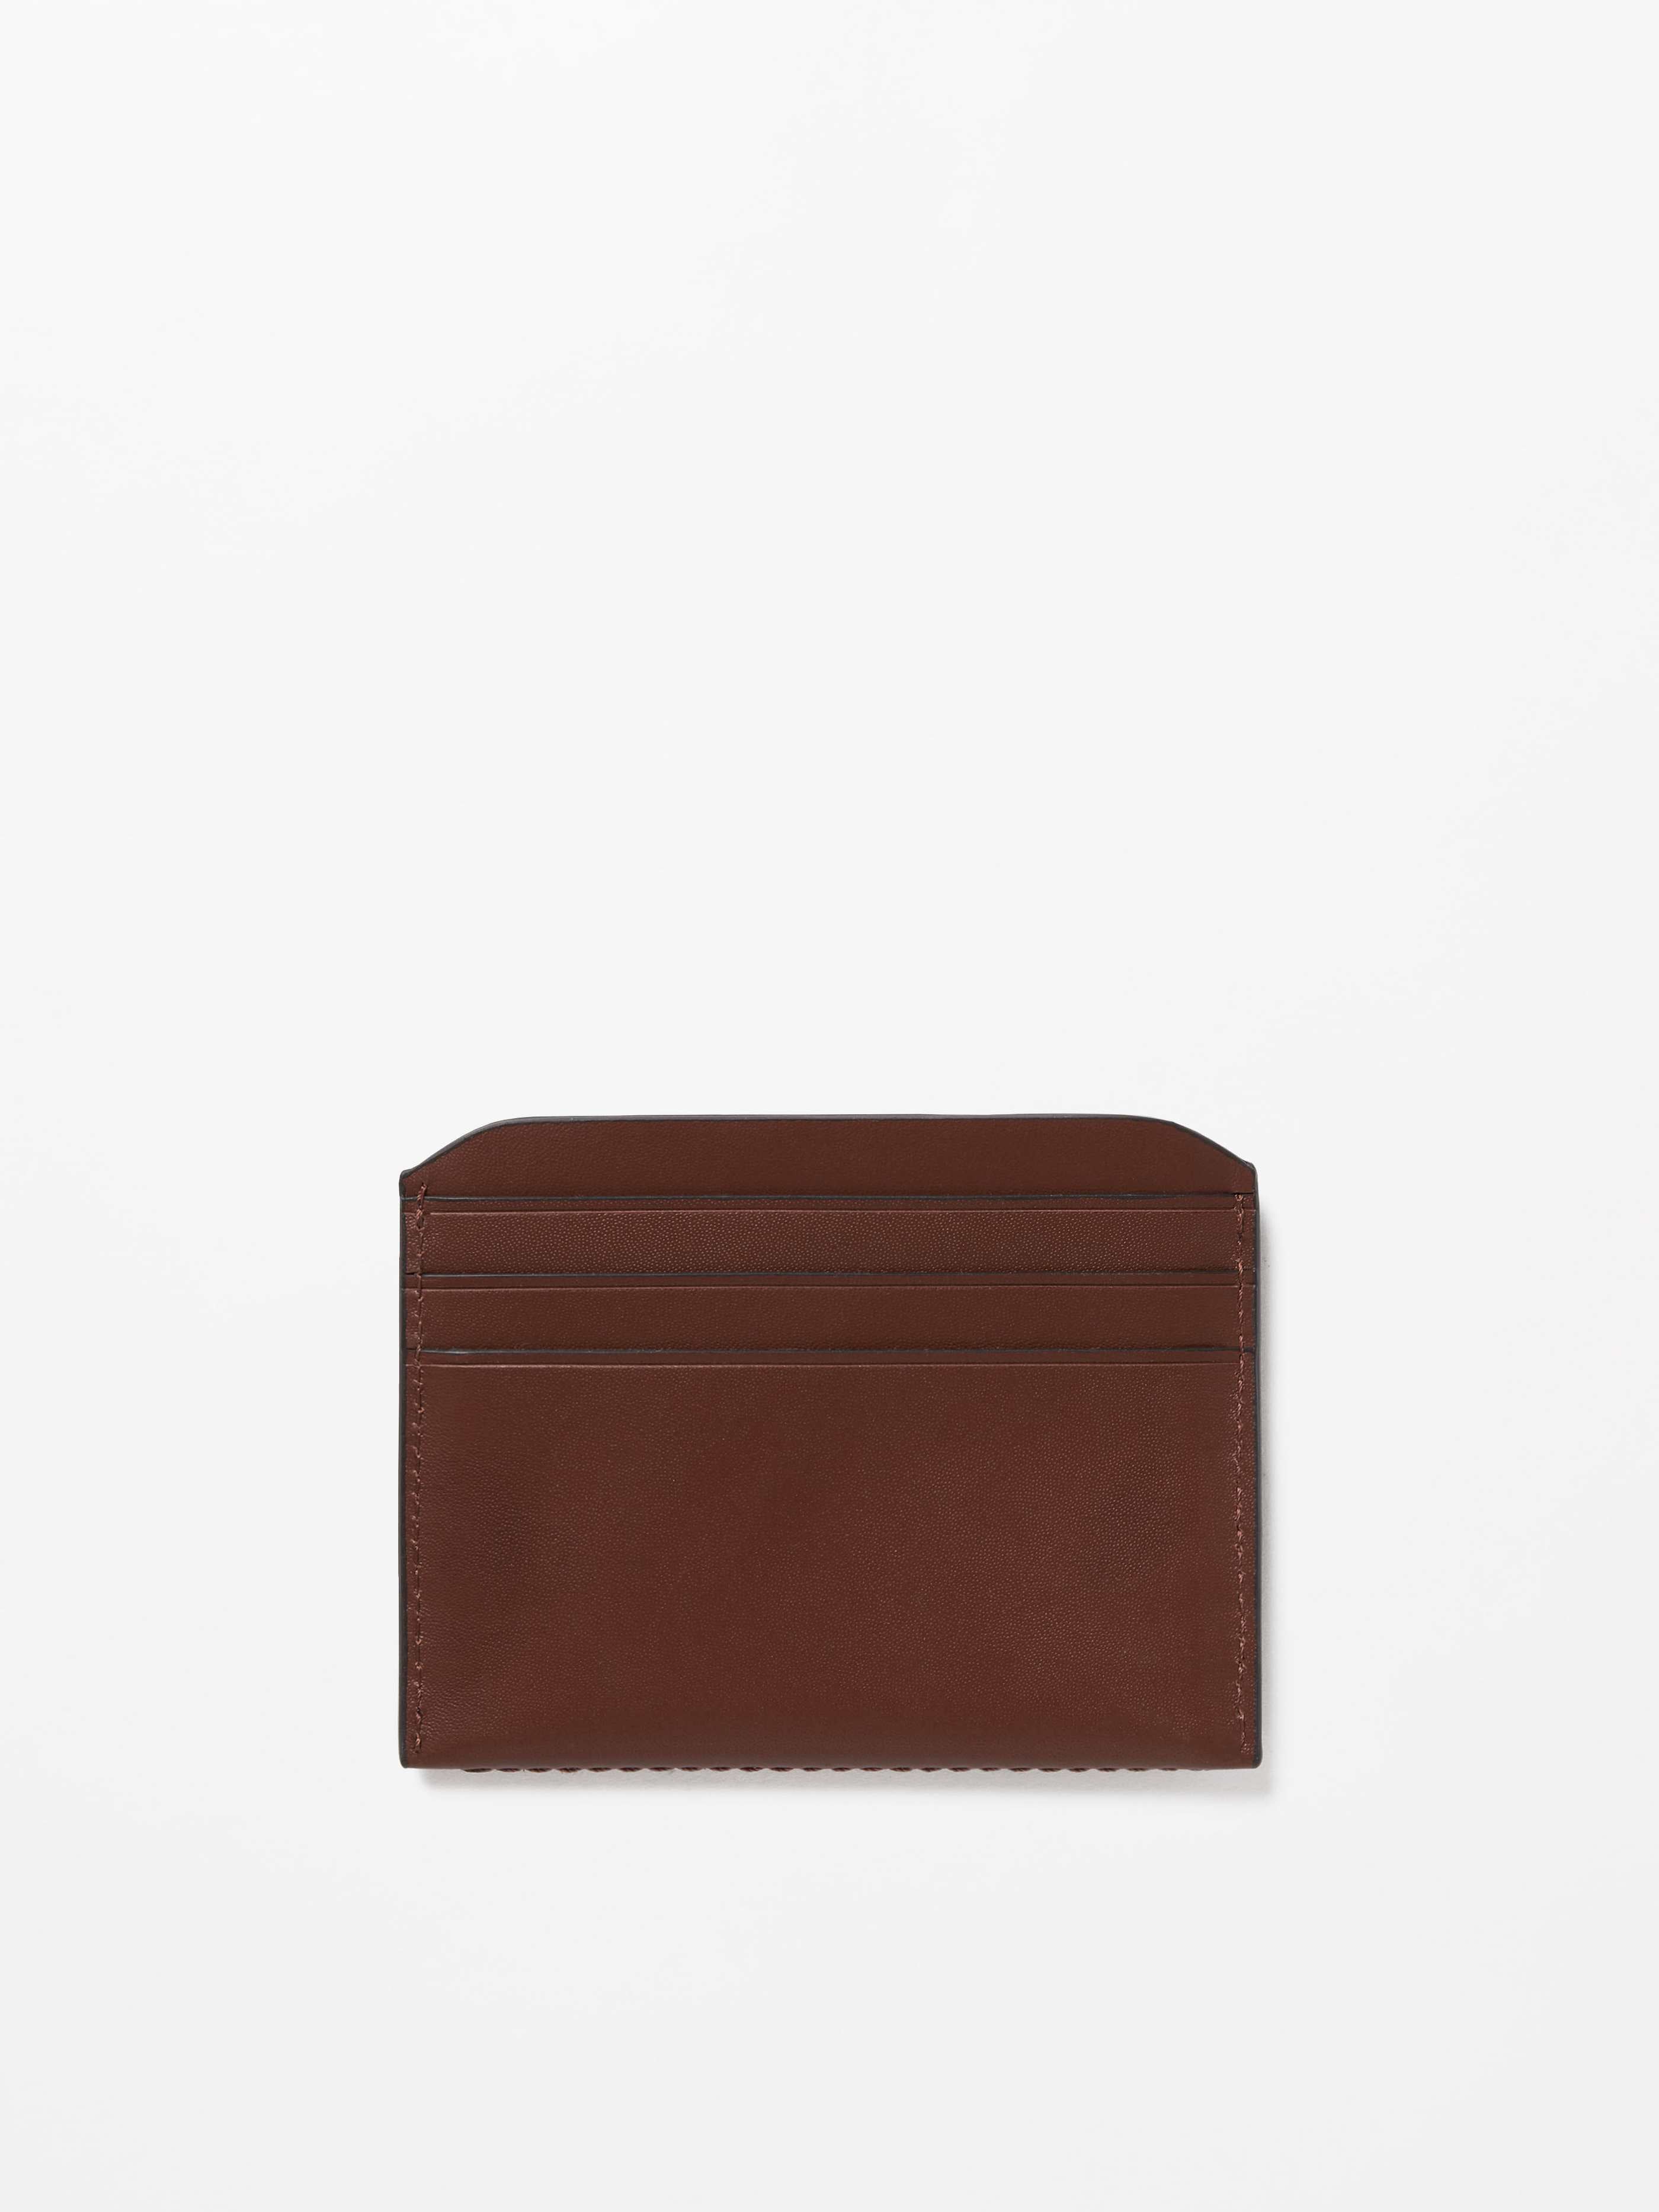 Tiger of Sweden Niam Cardholder T69097051 Brown Smooth Leather |  Shop from eightywingold an official brand partner for Tiger of Sweden Canada and US